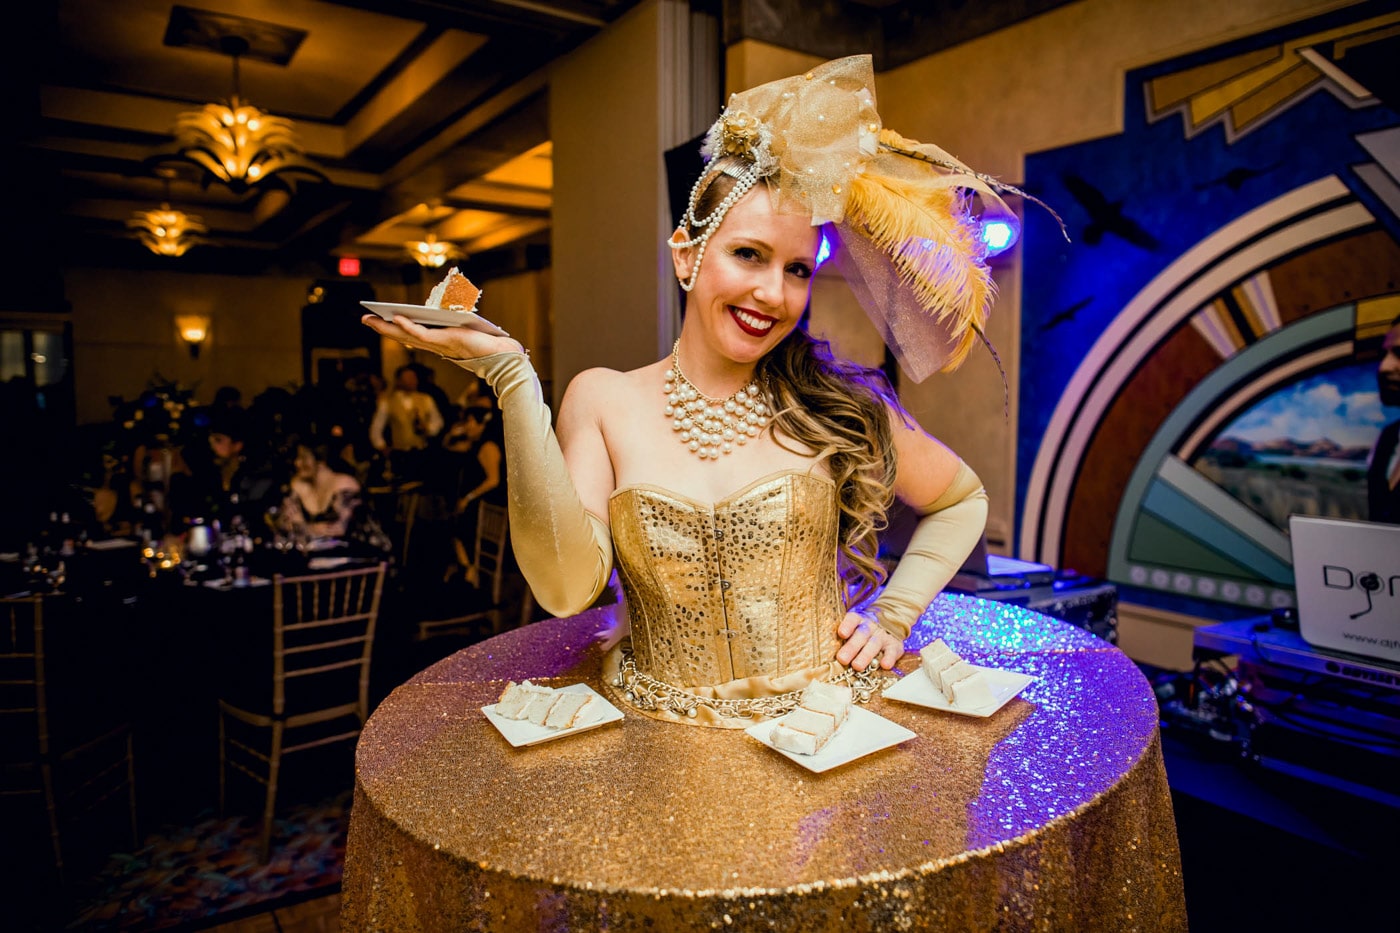 Woman with gold table dress offering cake